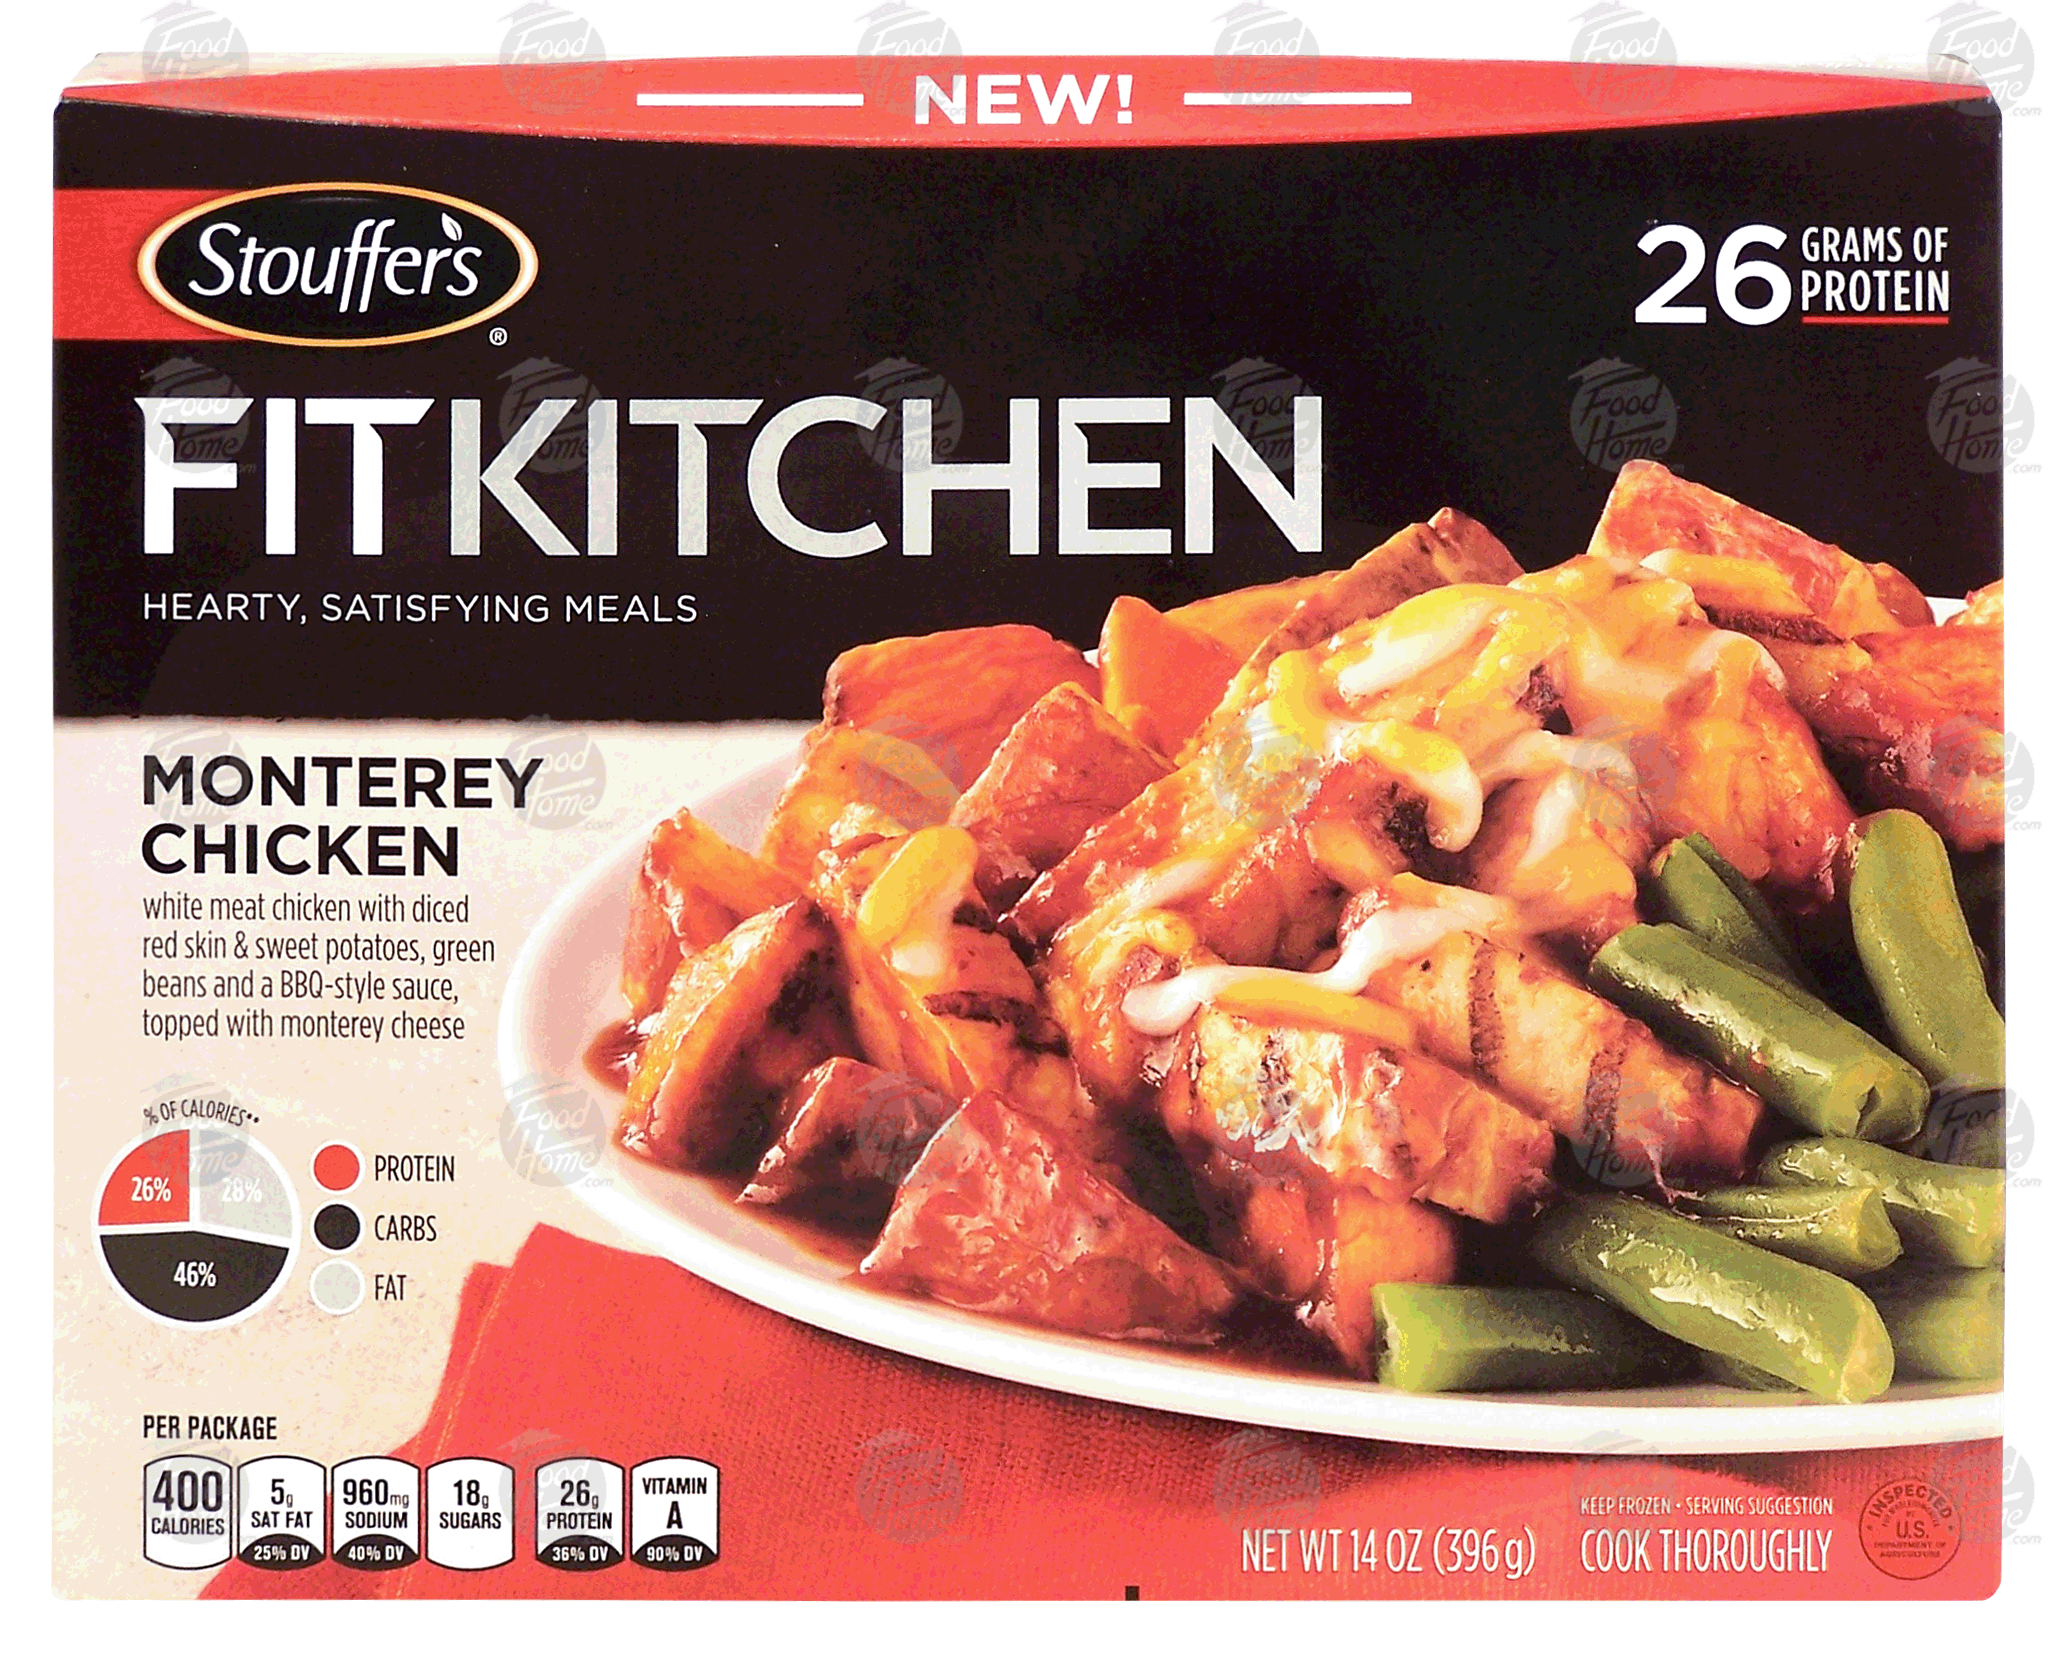 Groceries Expresscom Product Infomation For Stouffers FIT